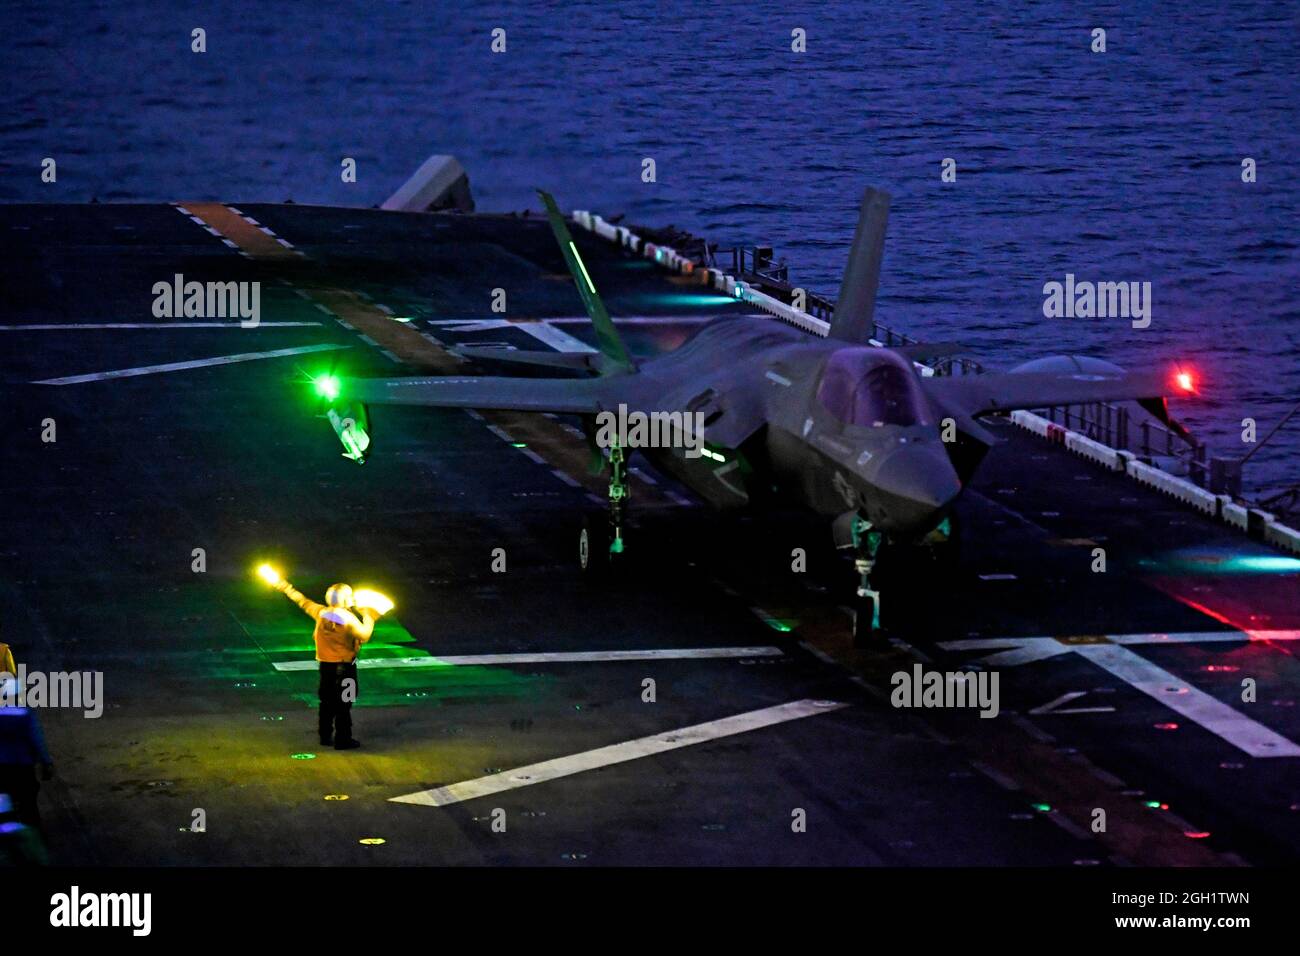 GULF OF THAILAND (Feb. 29, 2020) An F-35B Lightning II fighter aircraft assigned to the 31st Marine Expeditionary Unit (MEU), Marine Medium Tiltrotor Stock Photo